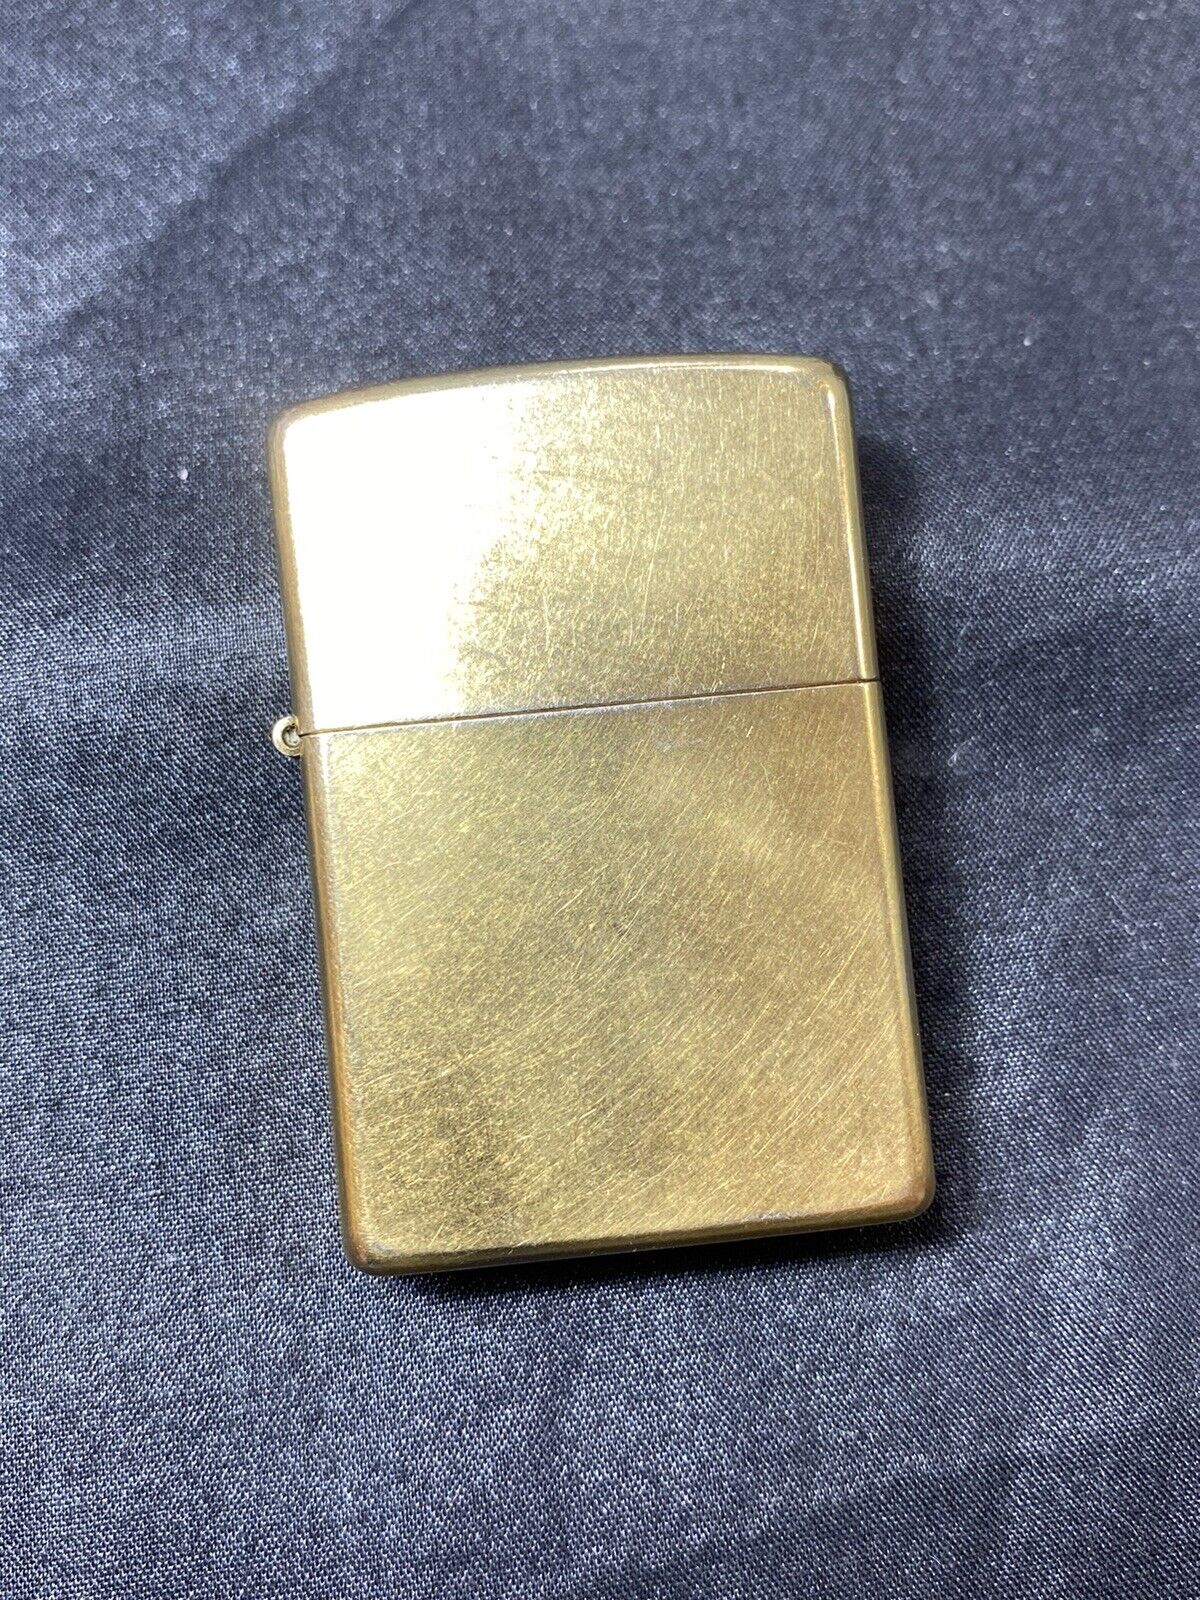 VINTAGE ZIPPO BRASS GOLD TONE LIGHTER E 2004 Polished Sparks And Ready For Fuel